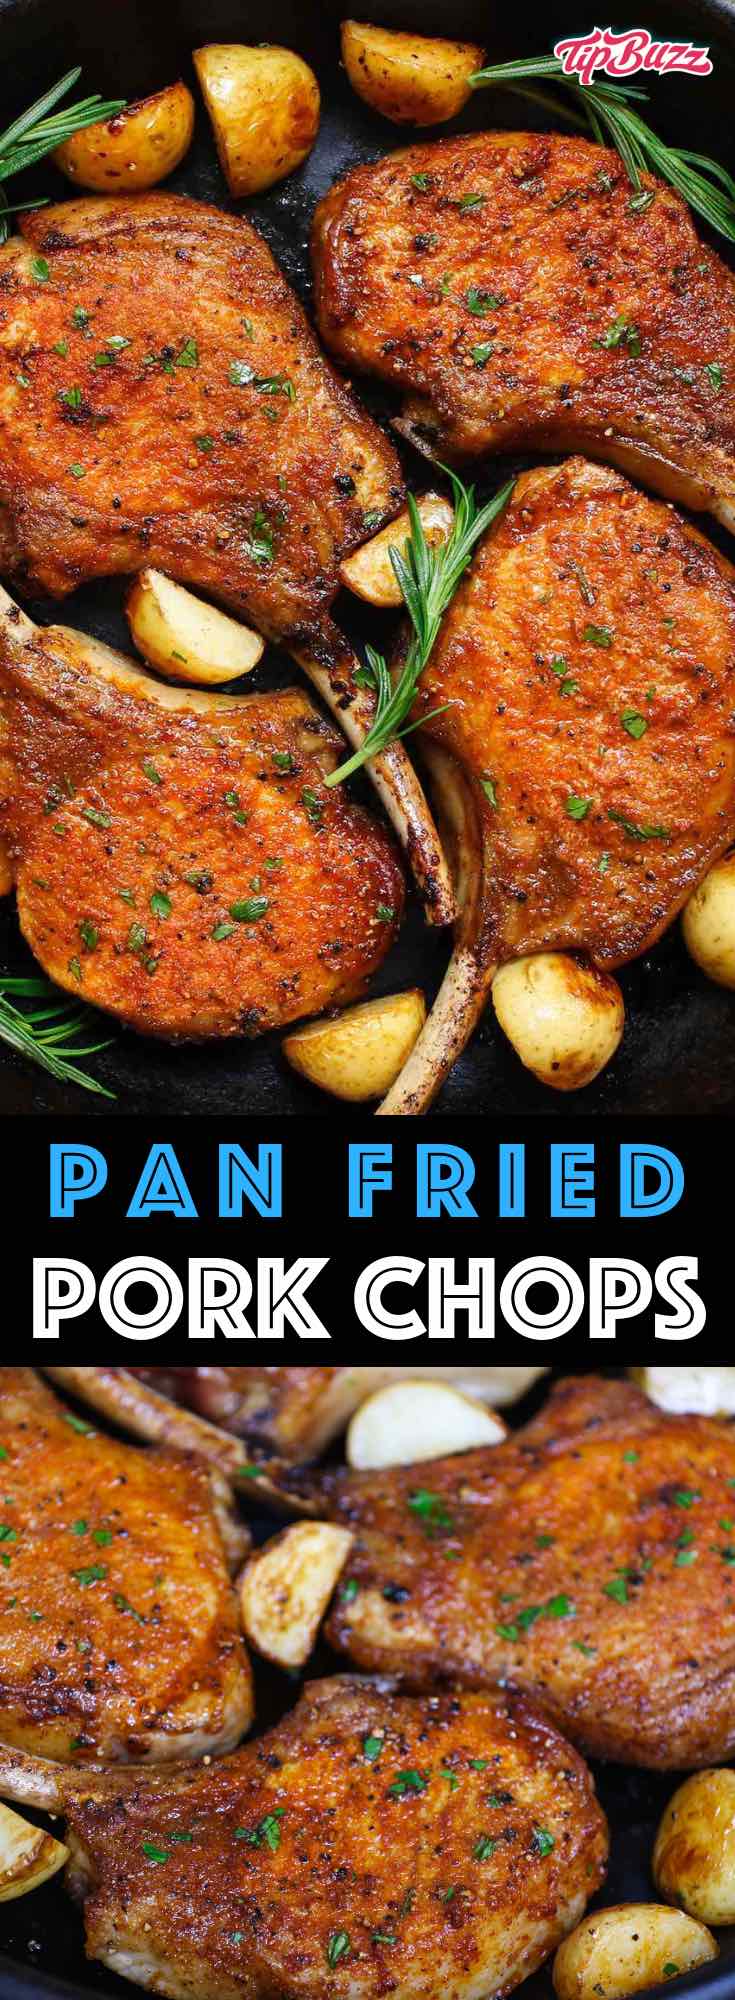 Pan Fried Pork Chops are a scrumptious, 5-ingredient pork chop recipe that’ll be on your dinner table in 15 minutes. They feature a mouthwatering golden crust with no marinating or breading required.